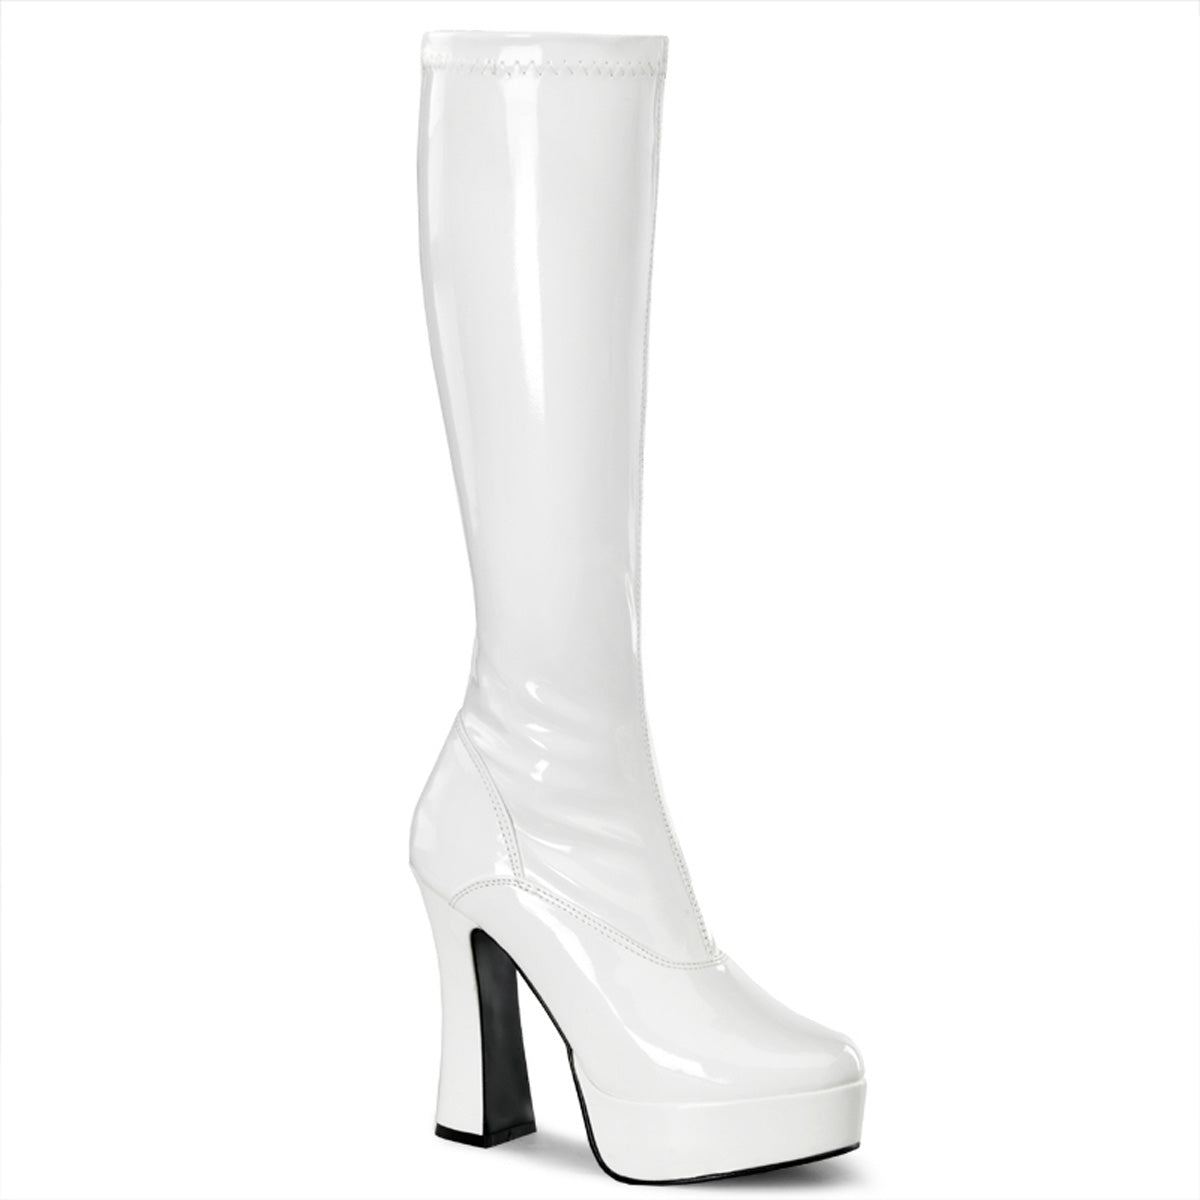 ELECTRA-2000Z 5" Heel White Patent Pole Dancing Platforms-Pleaser- Sexy Shoes